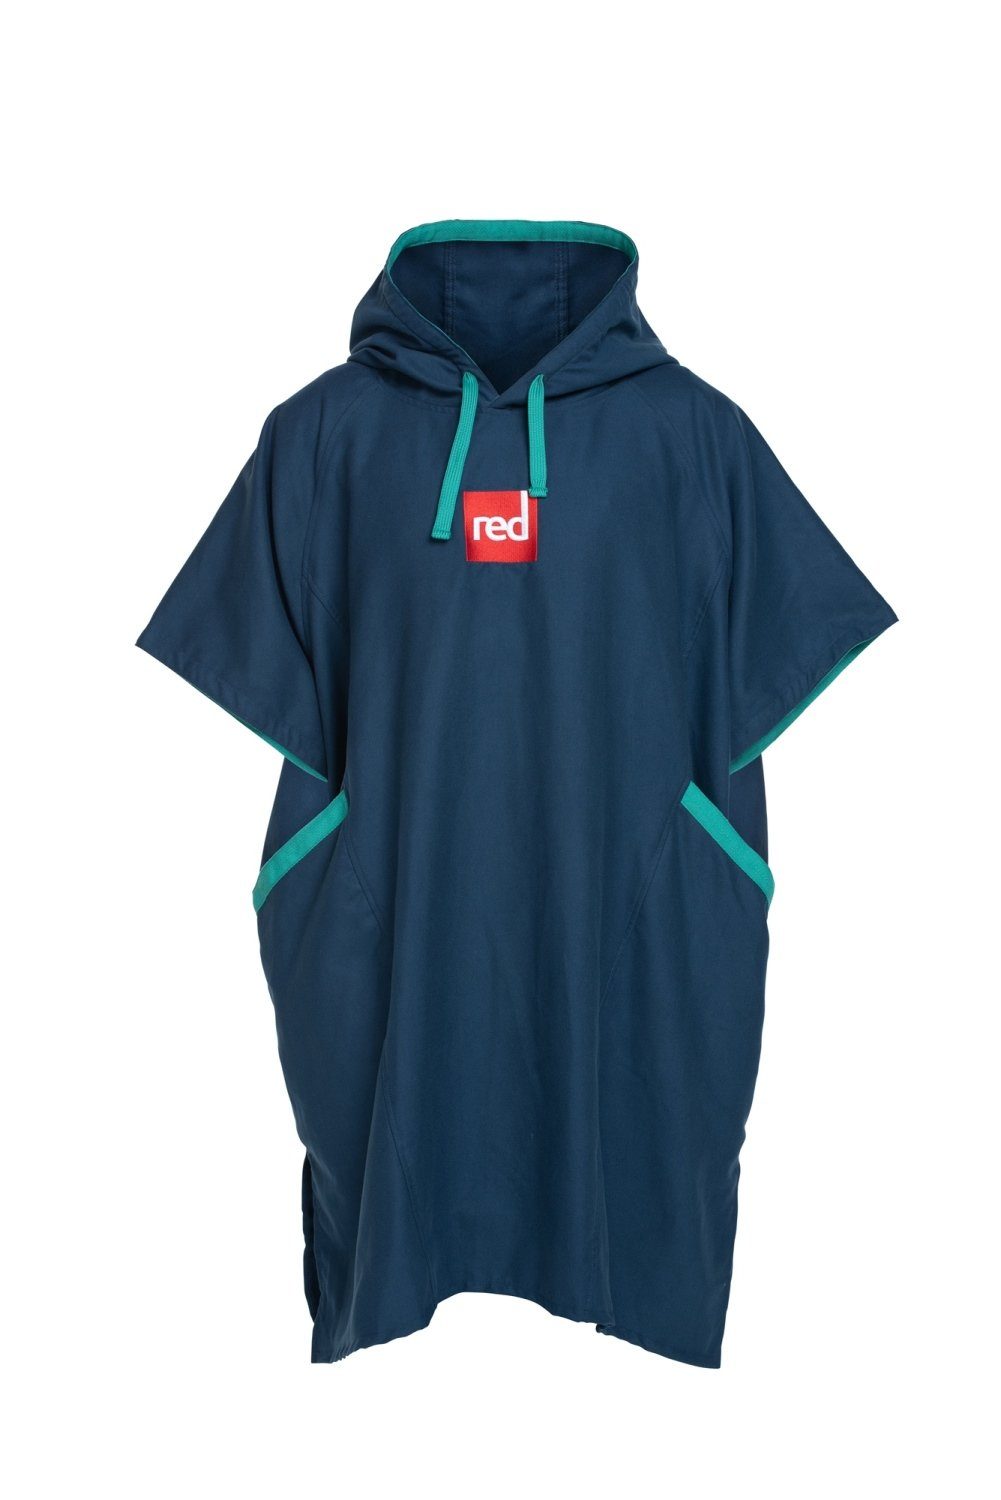 Robe Paddle Co Dry Badeponcho Poncho Blue Navy Paddle Quick Unisex Change Red Red